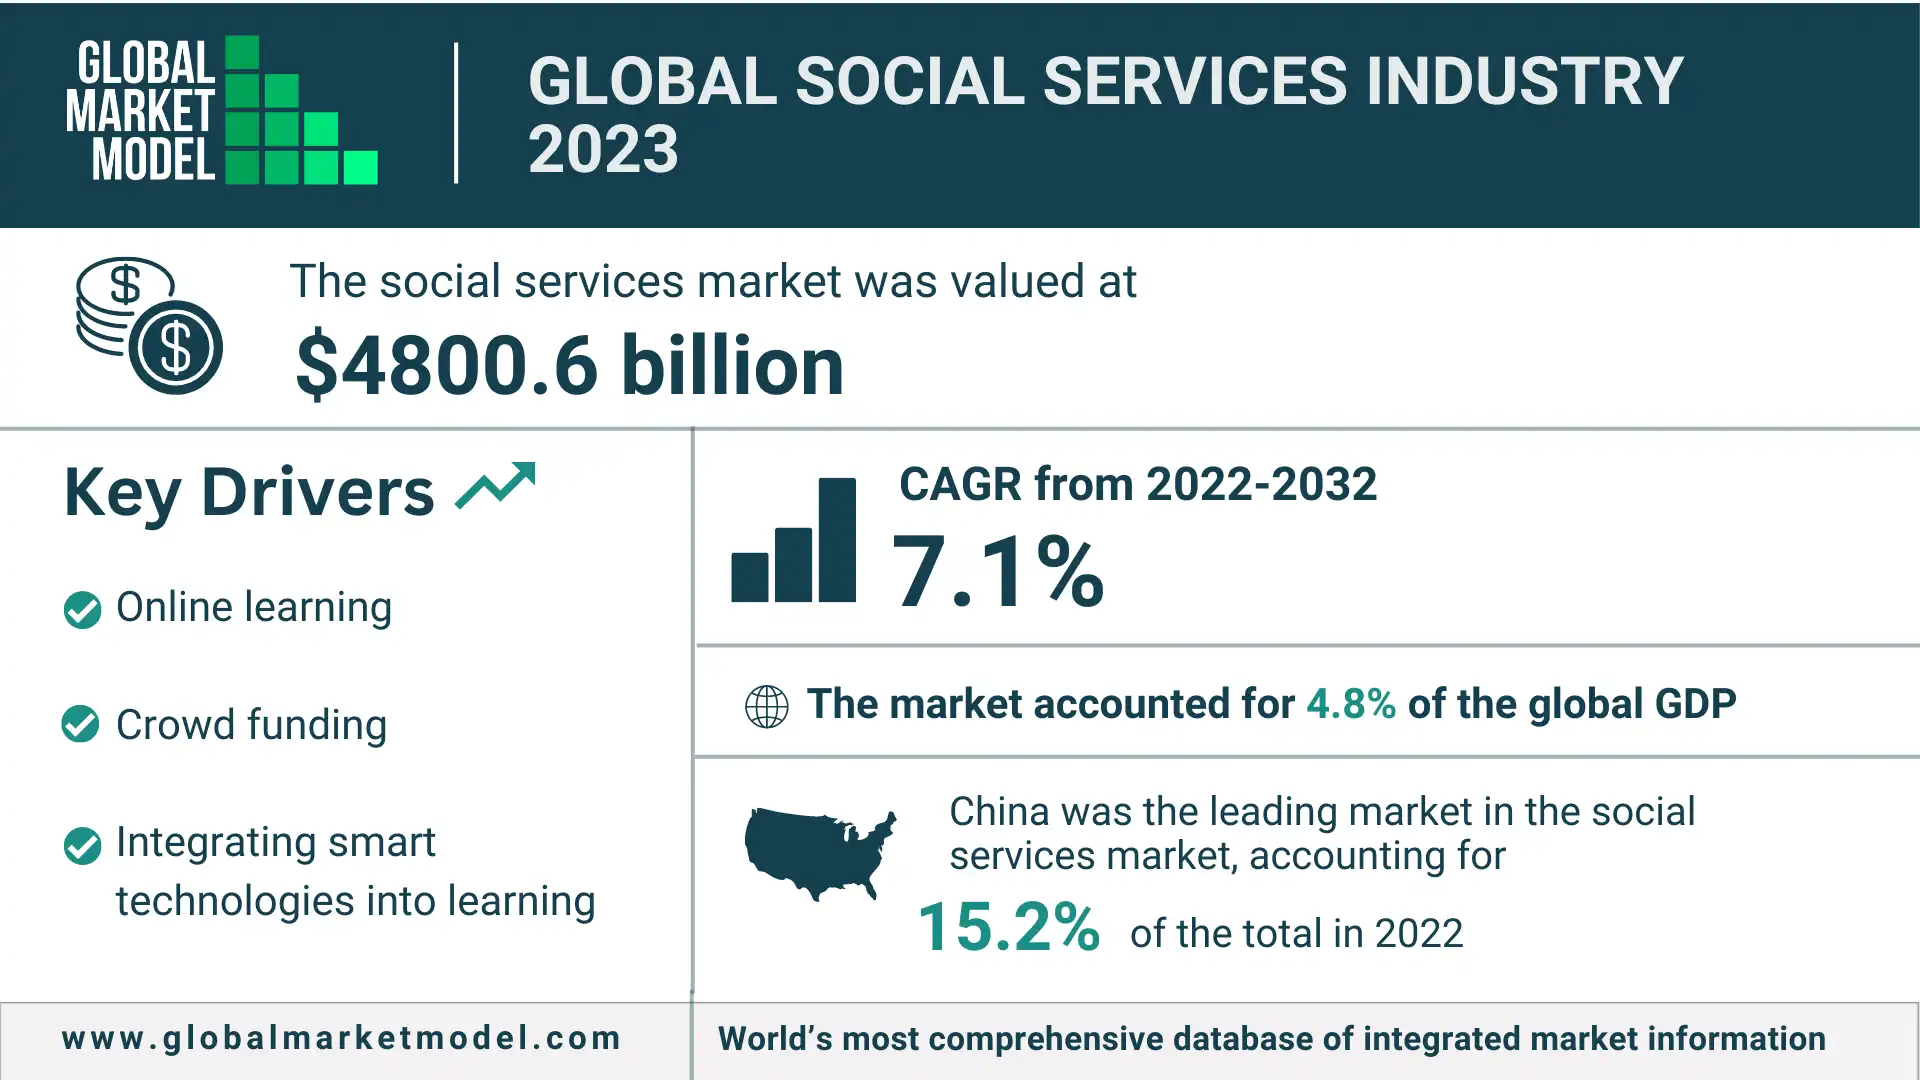 Global Social Services Industry 2023